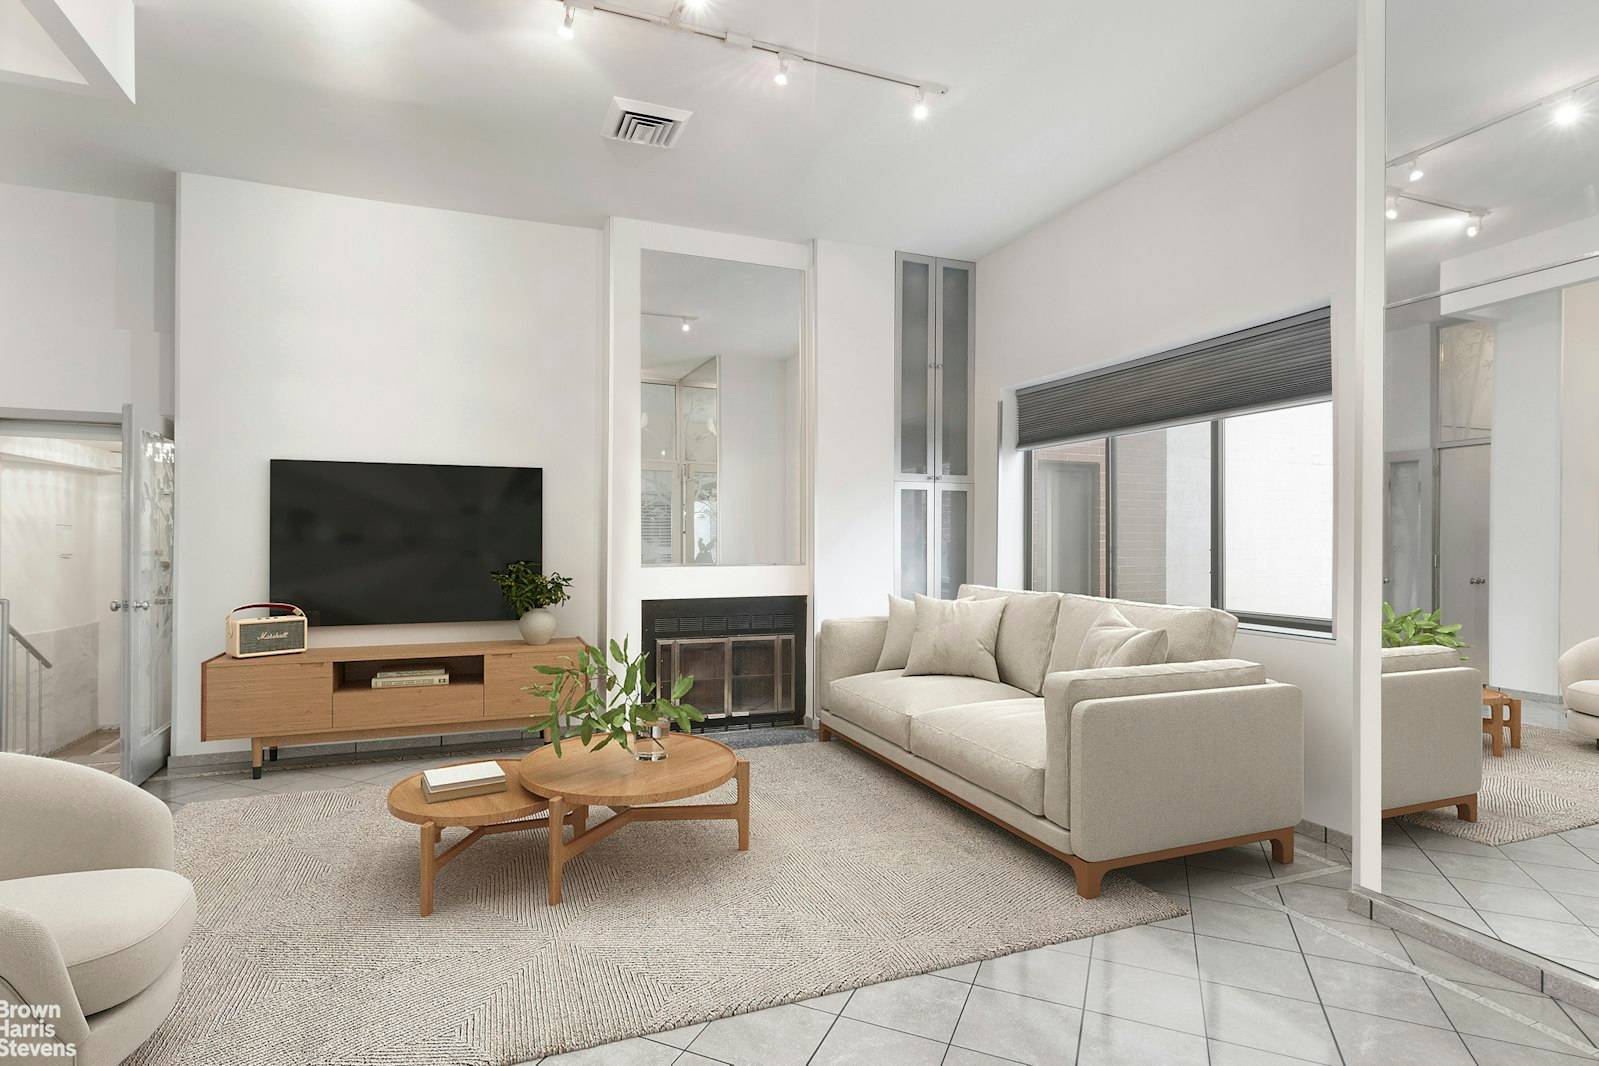 Space is always a premium in New York, and this 1, 200 square foot duplex 2 bedroom 2 bathroom perfectly fits the bill.